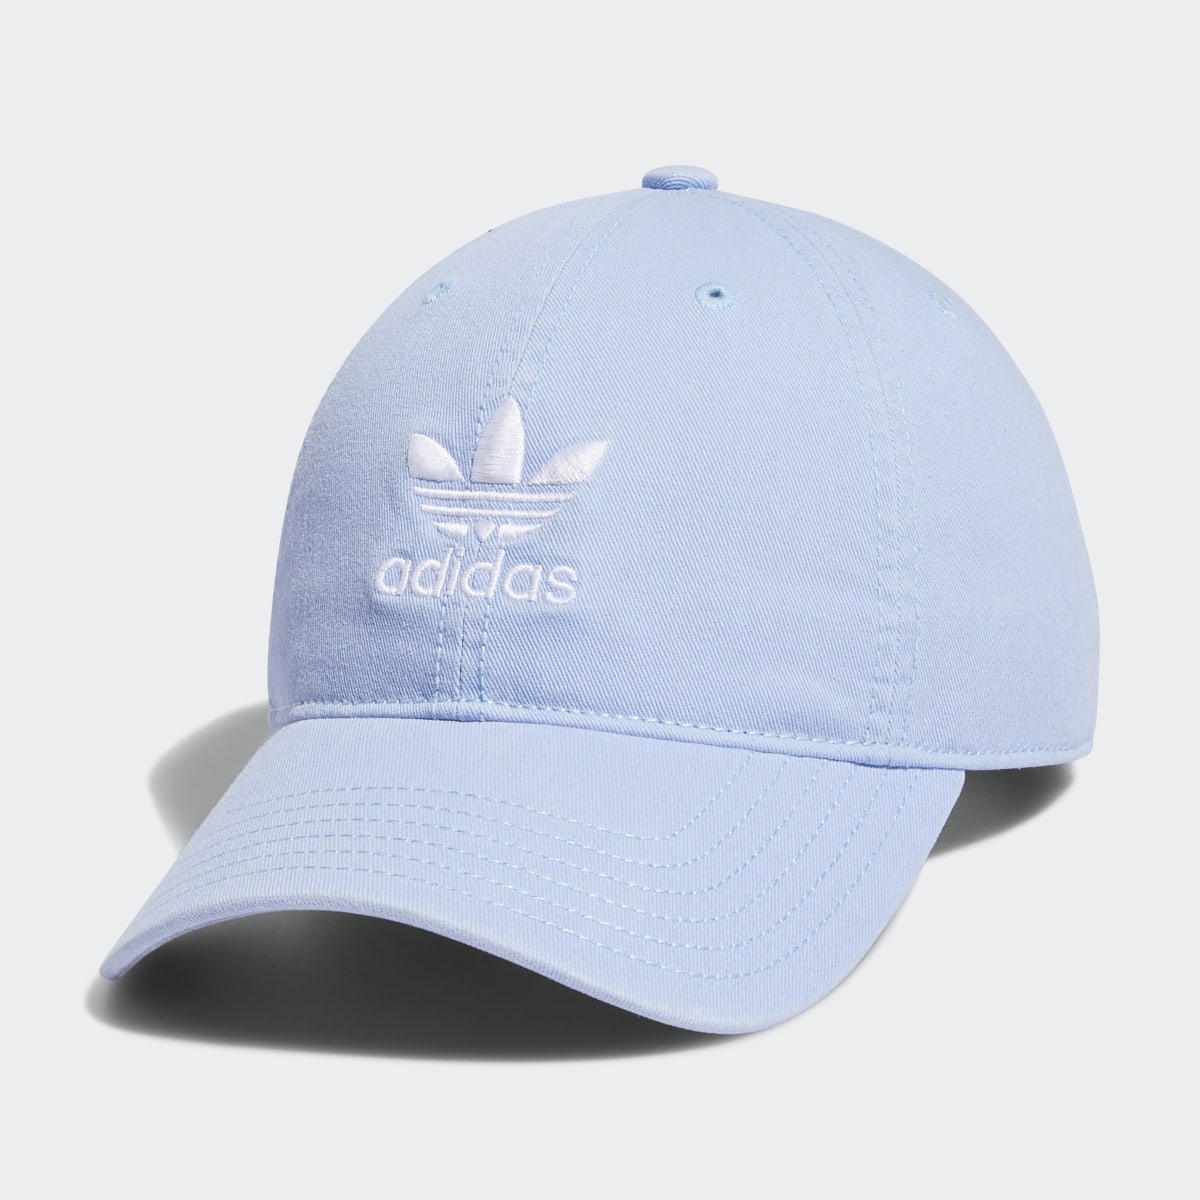 Adidas Relaxed Strap Back Hat. 4